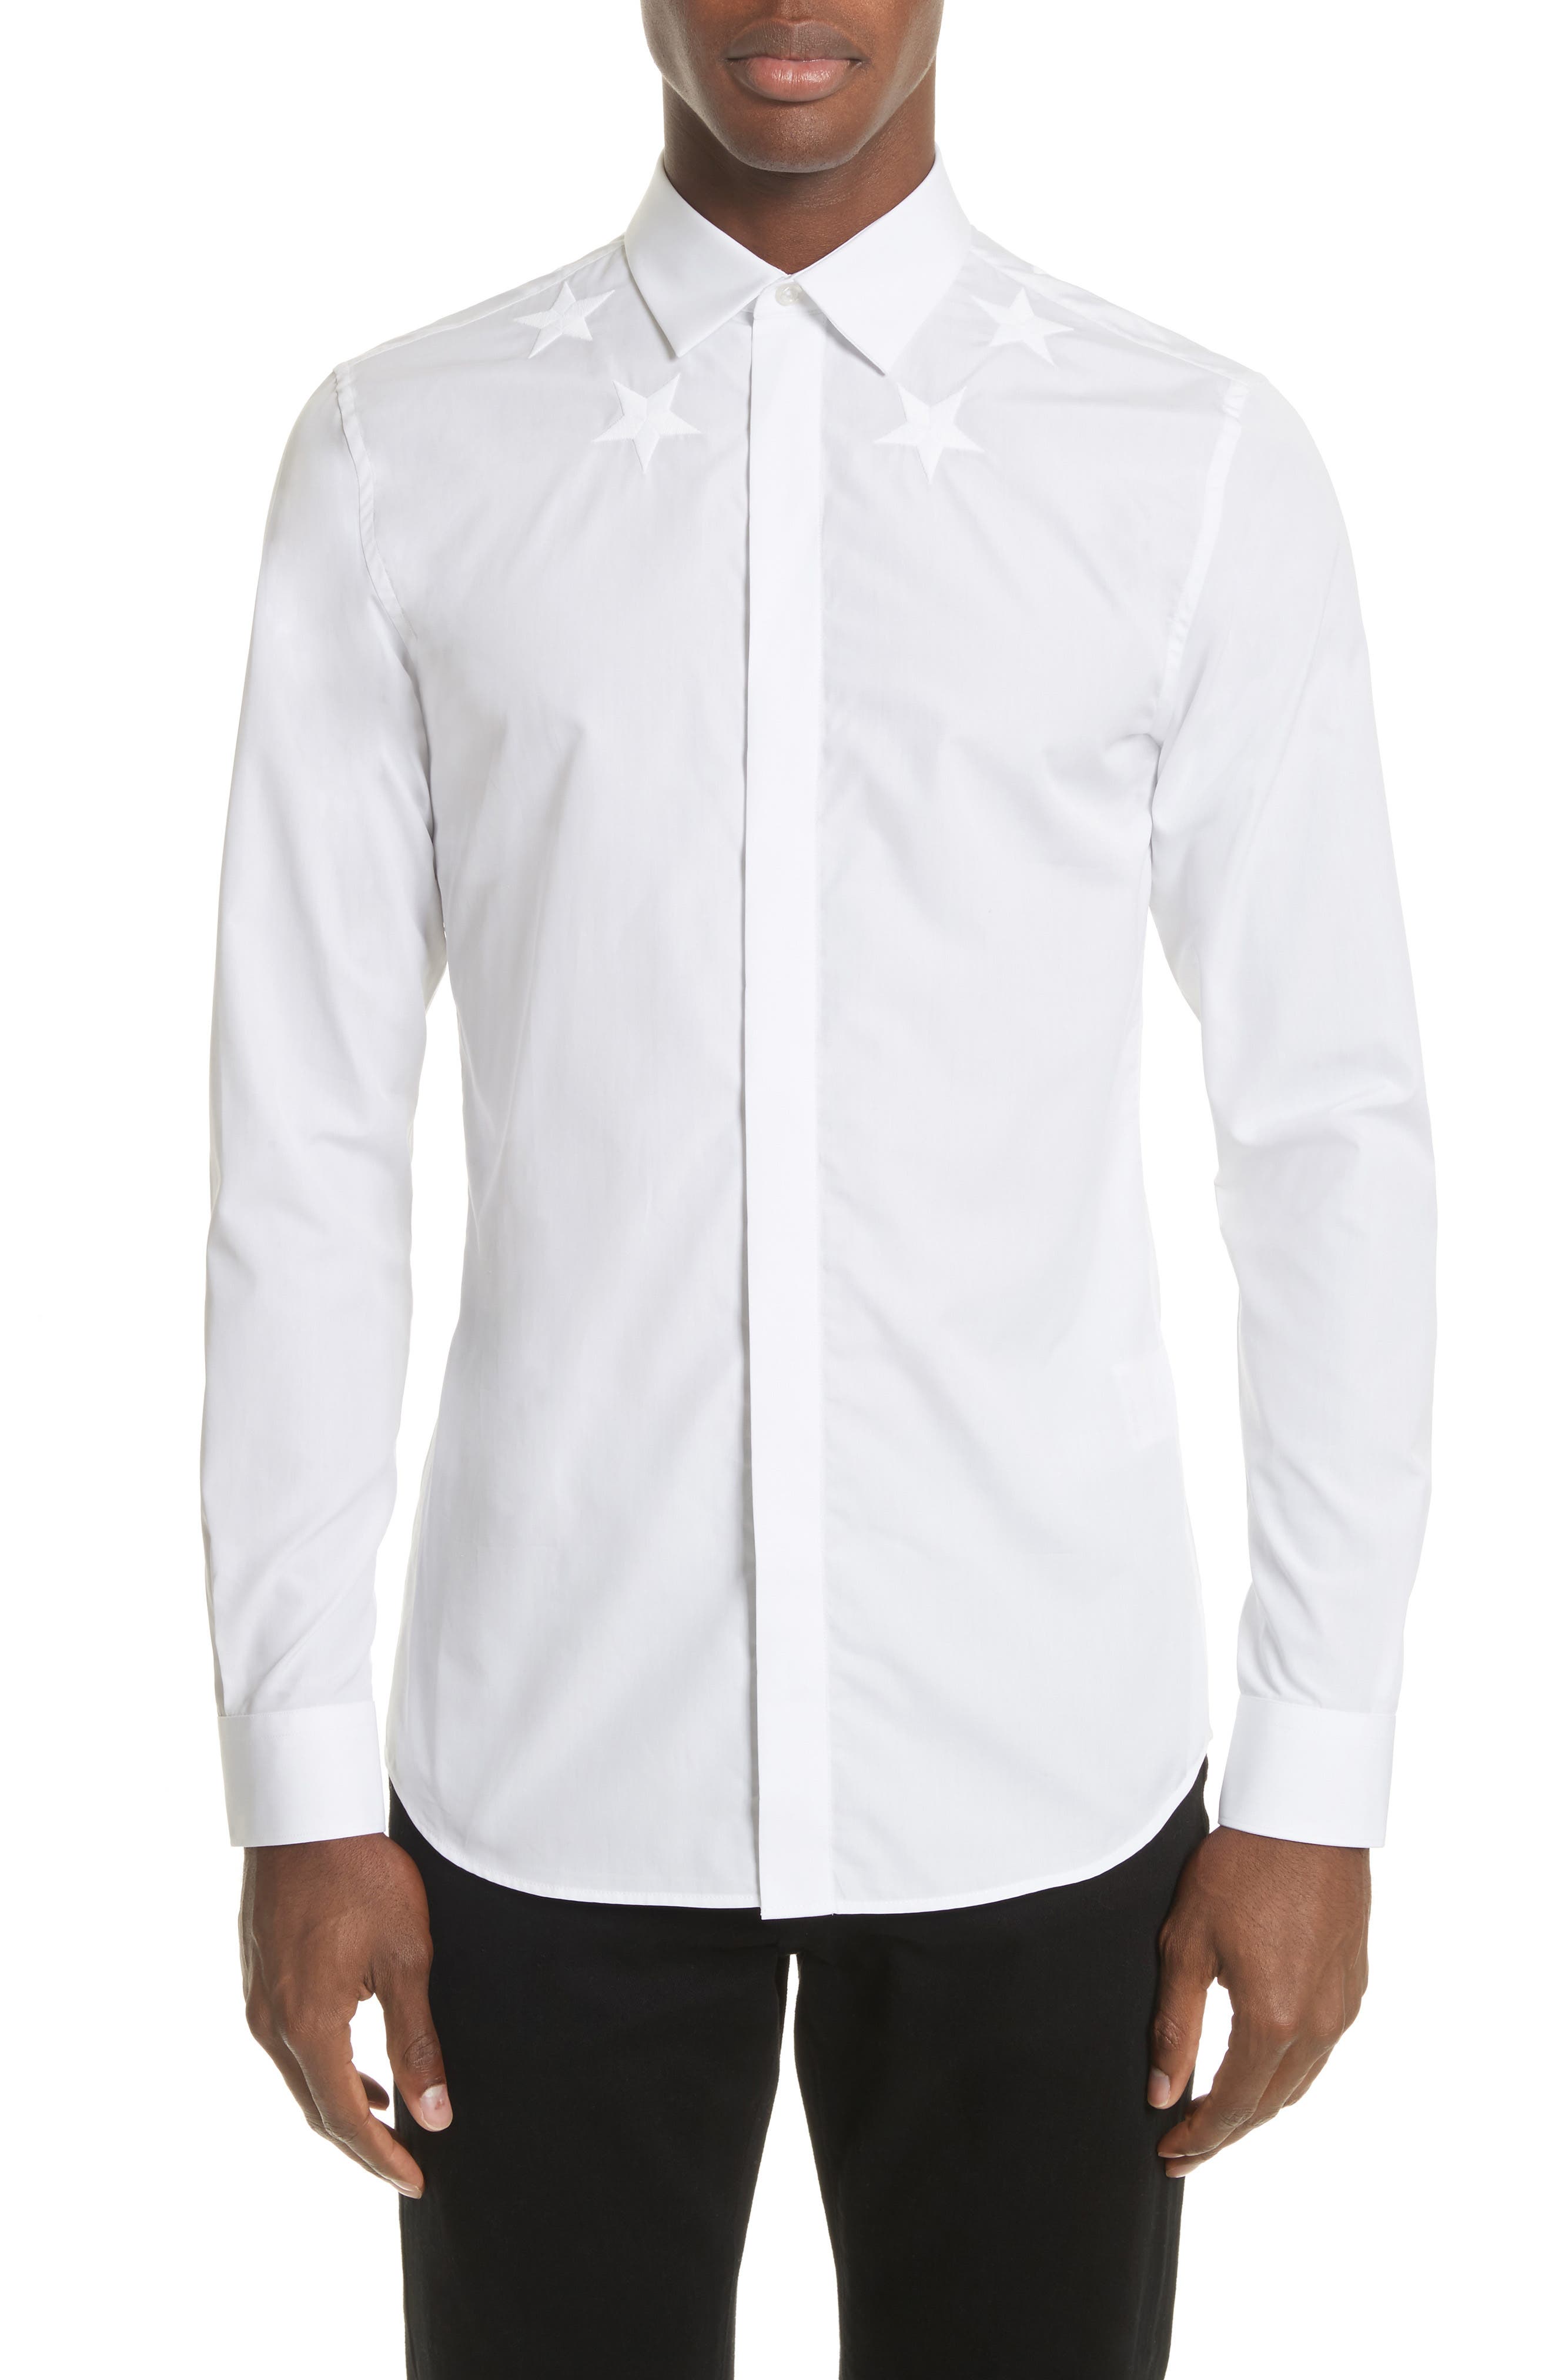 Givenchy Embroidered Star Dress Shirt 